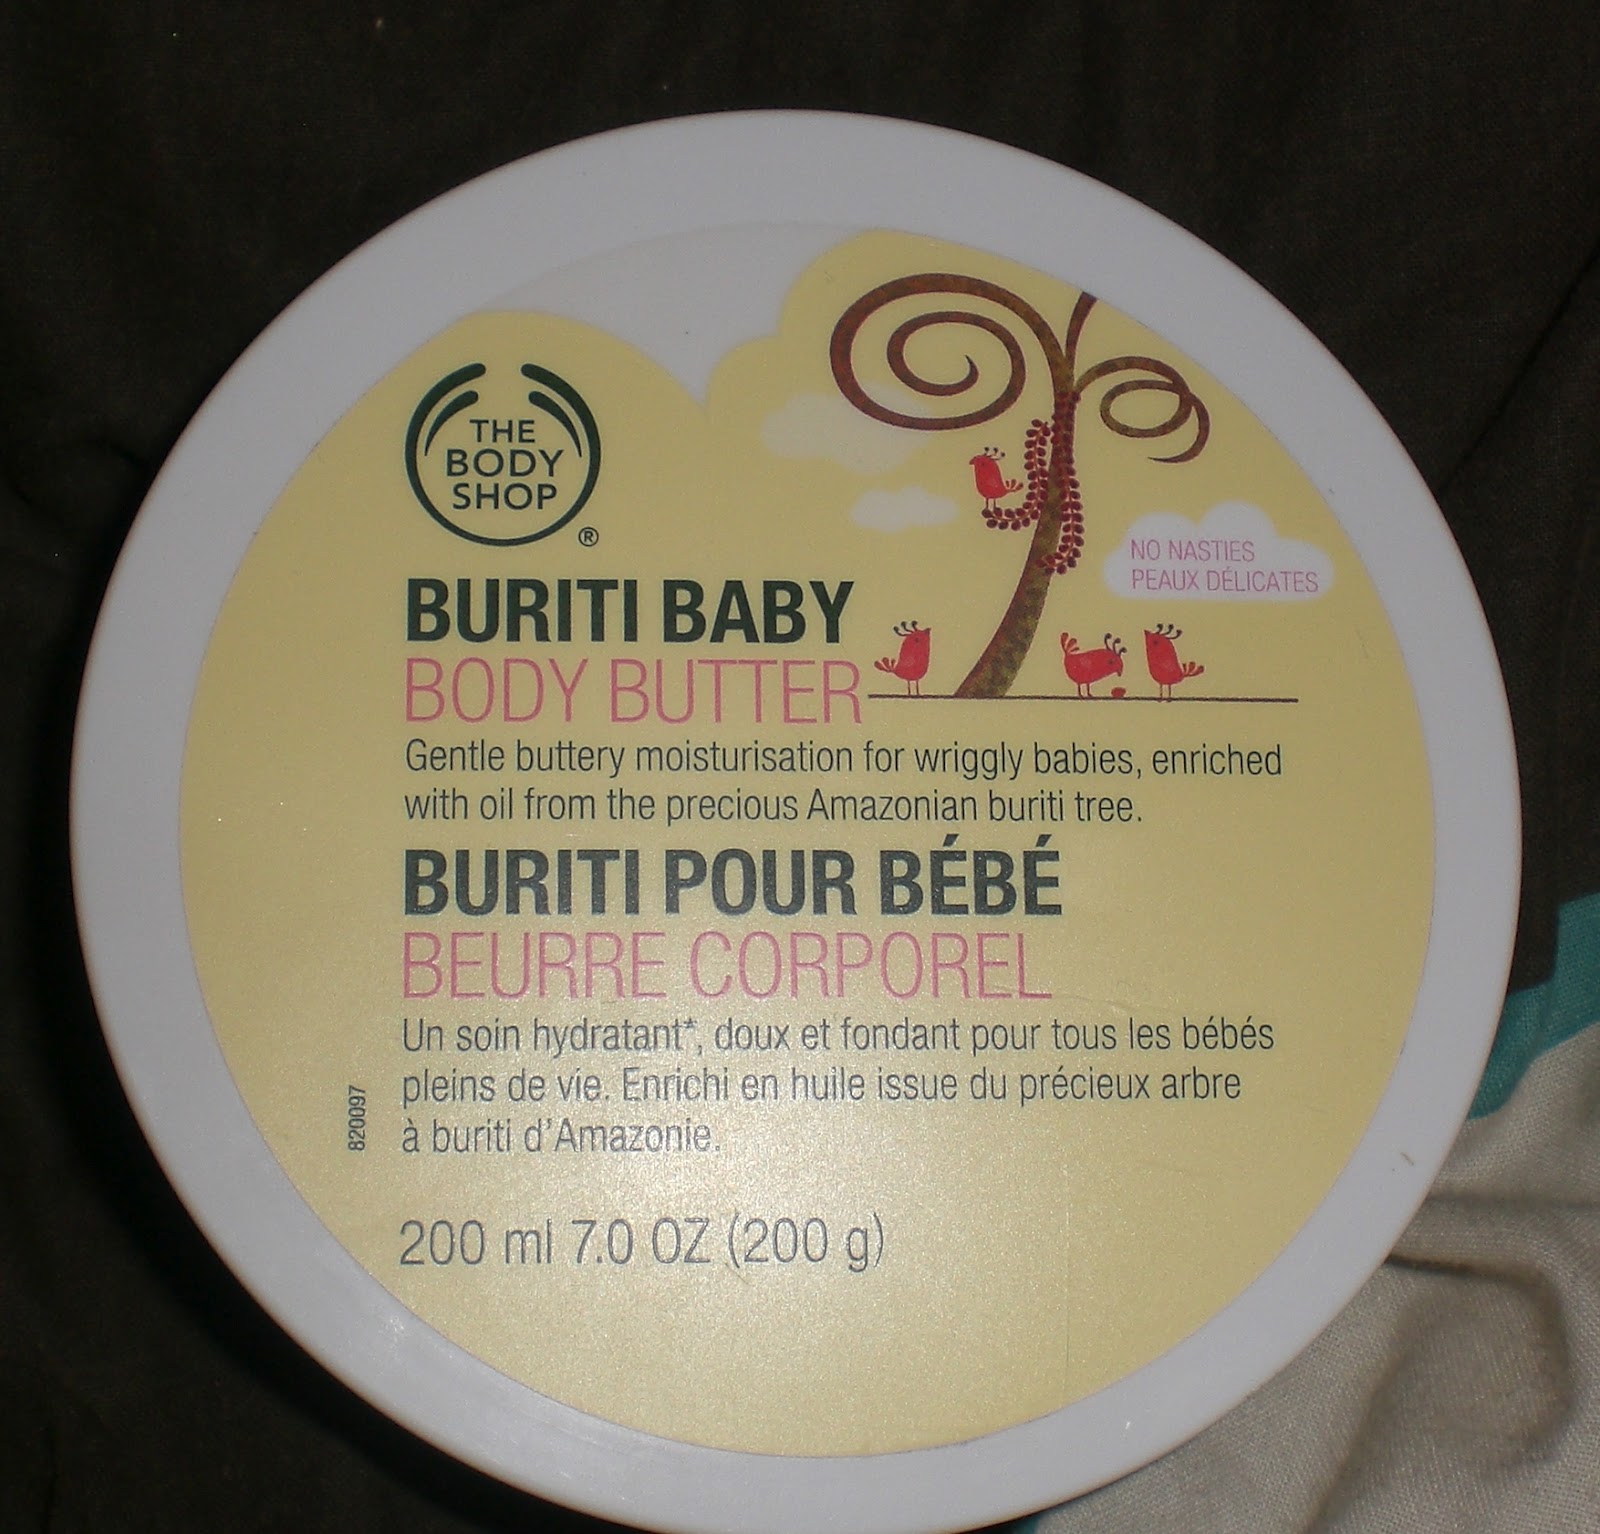 Cotton Candy Fro: The Body Shop Buriti Baby Butter